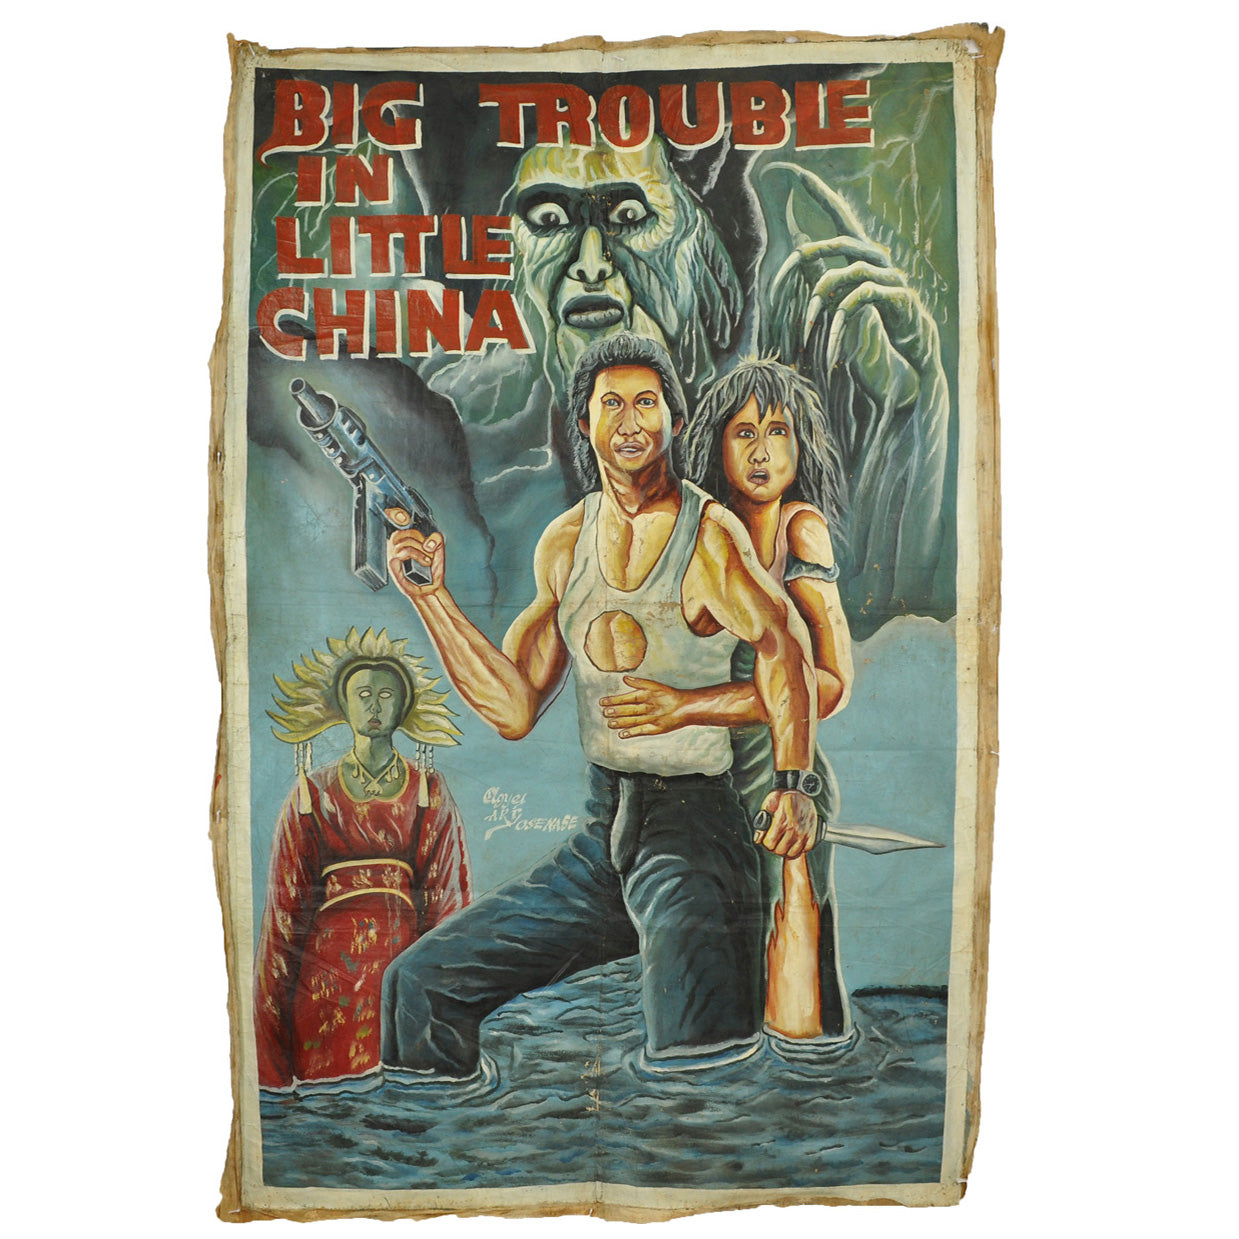 BIG TROUBLE IN LITTLE CHINA MOVIE POSTER HAND PAINTED IN GHANA FOR THE LOCAL CINEMA